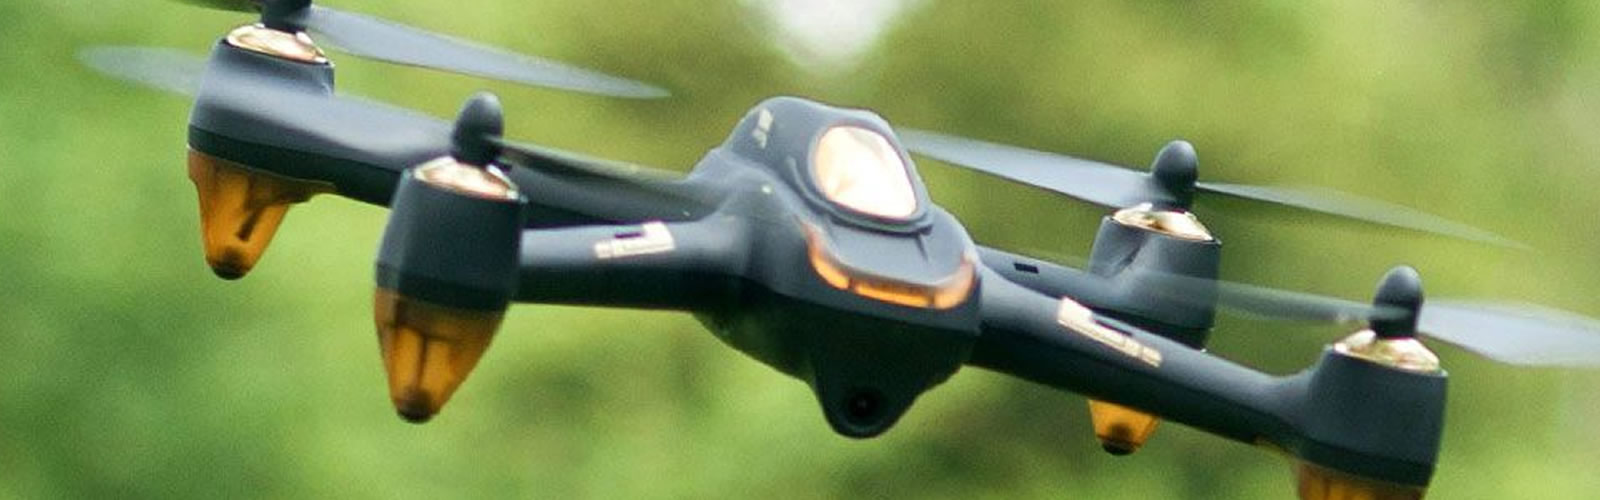 Remote control drone in flight with green background